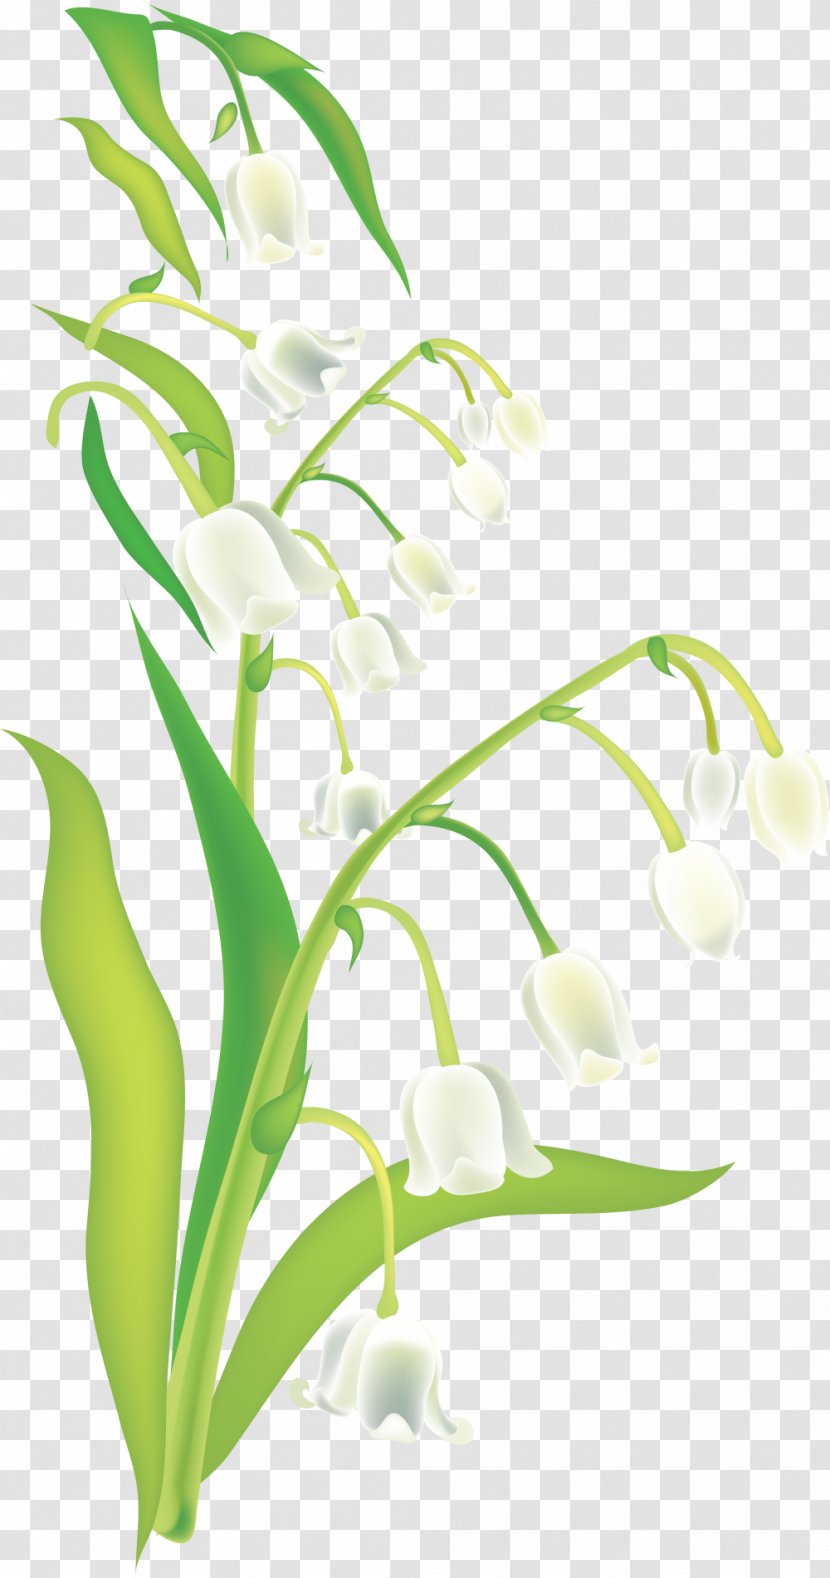 Bell - Petal - Lily Of The Valley Transparent PNG